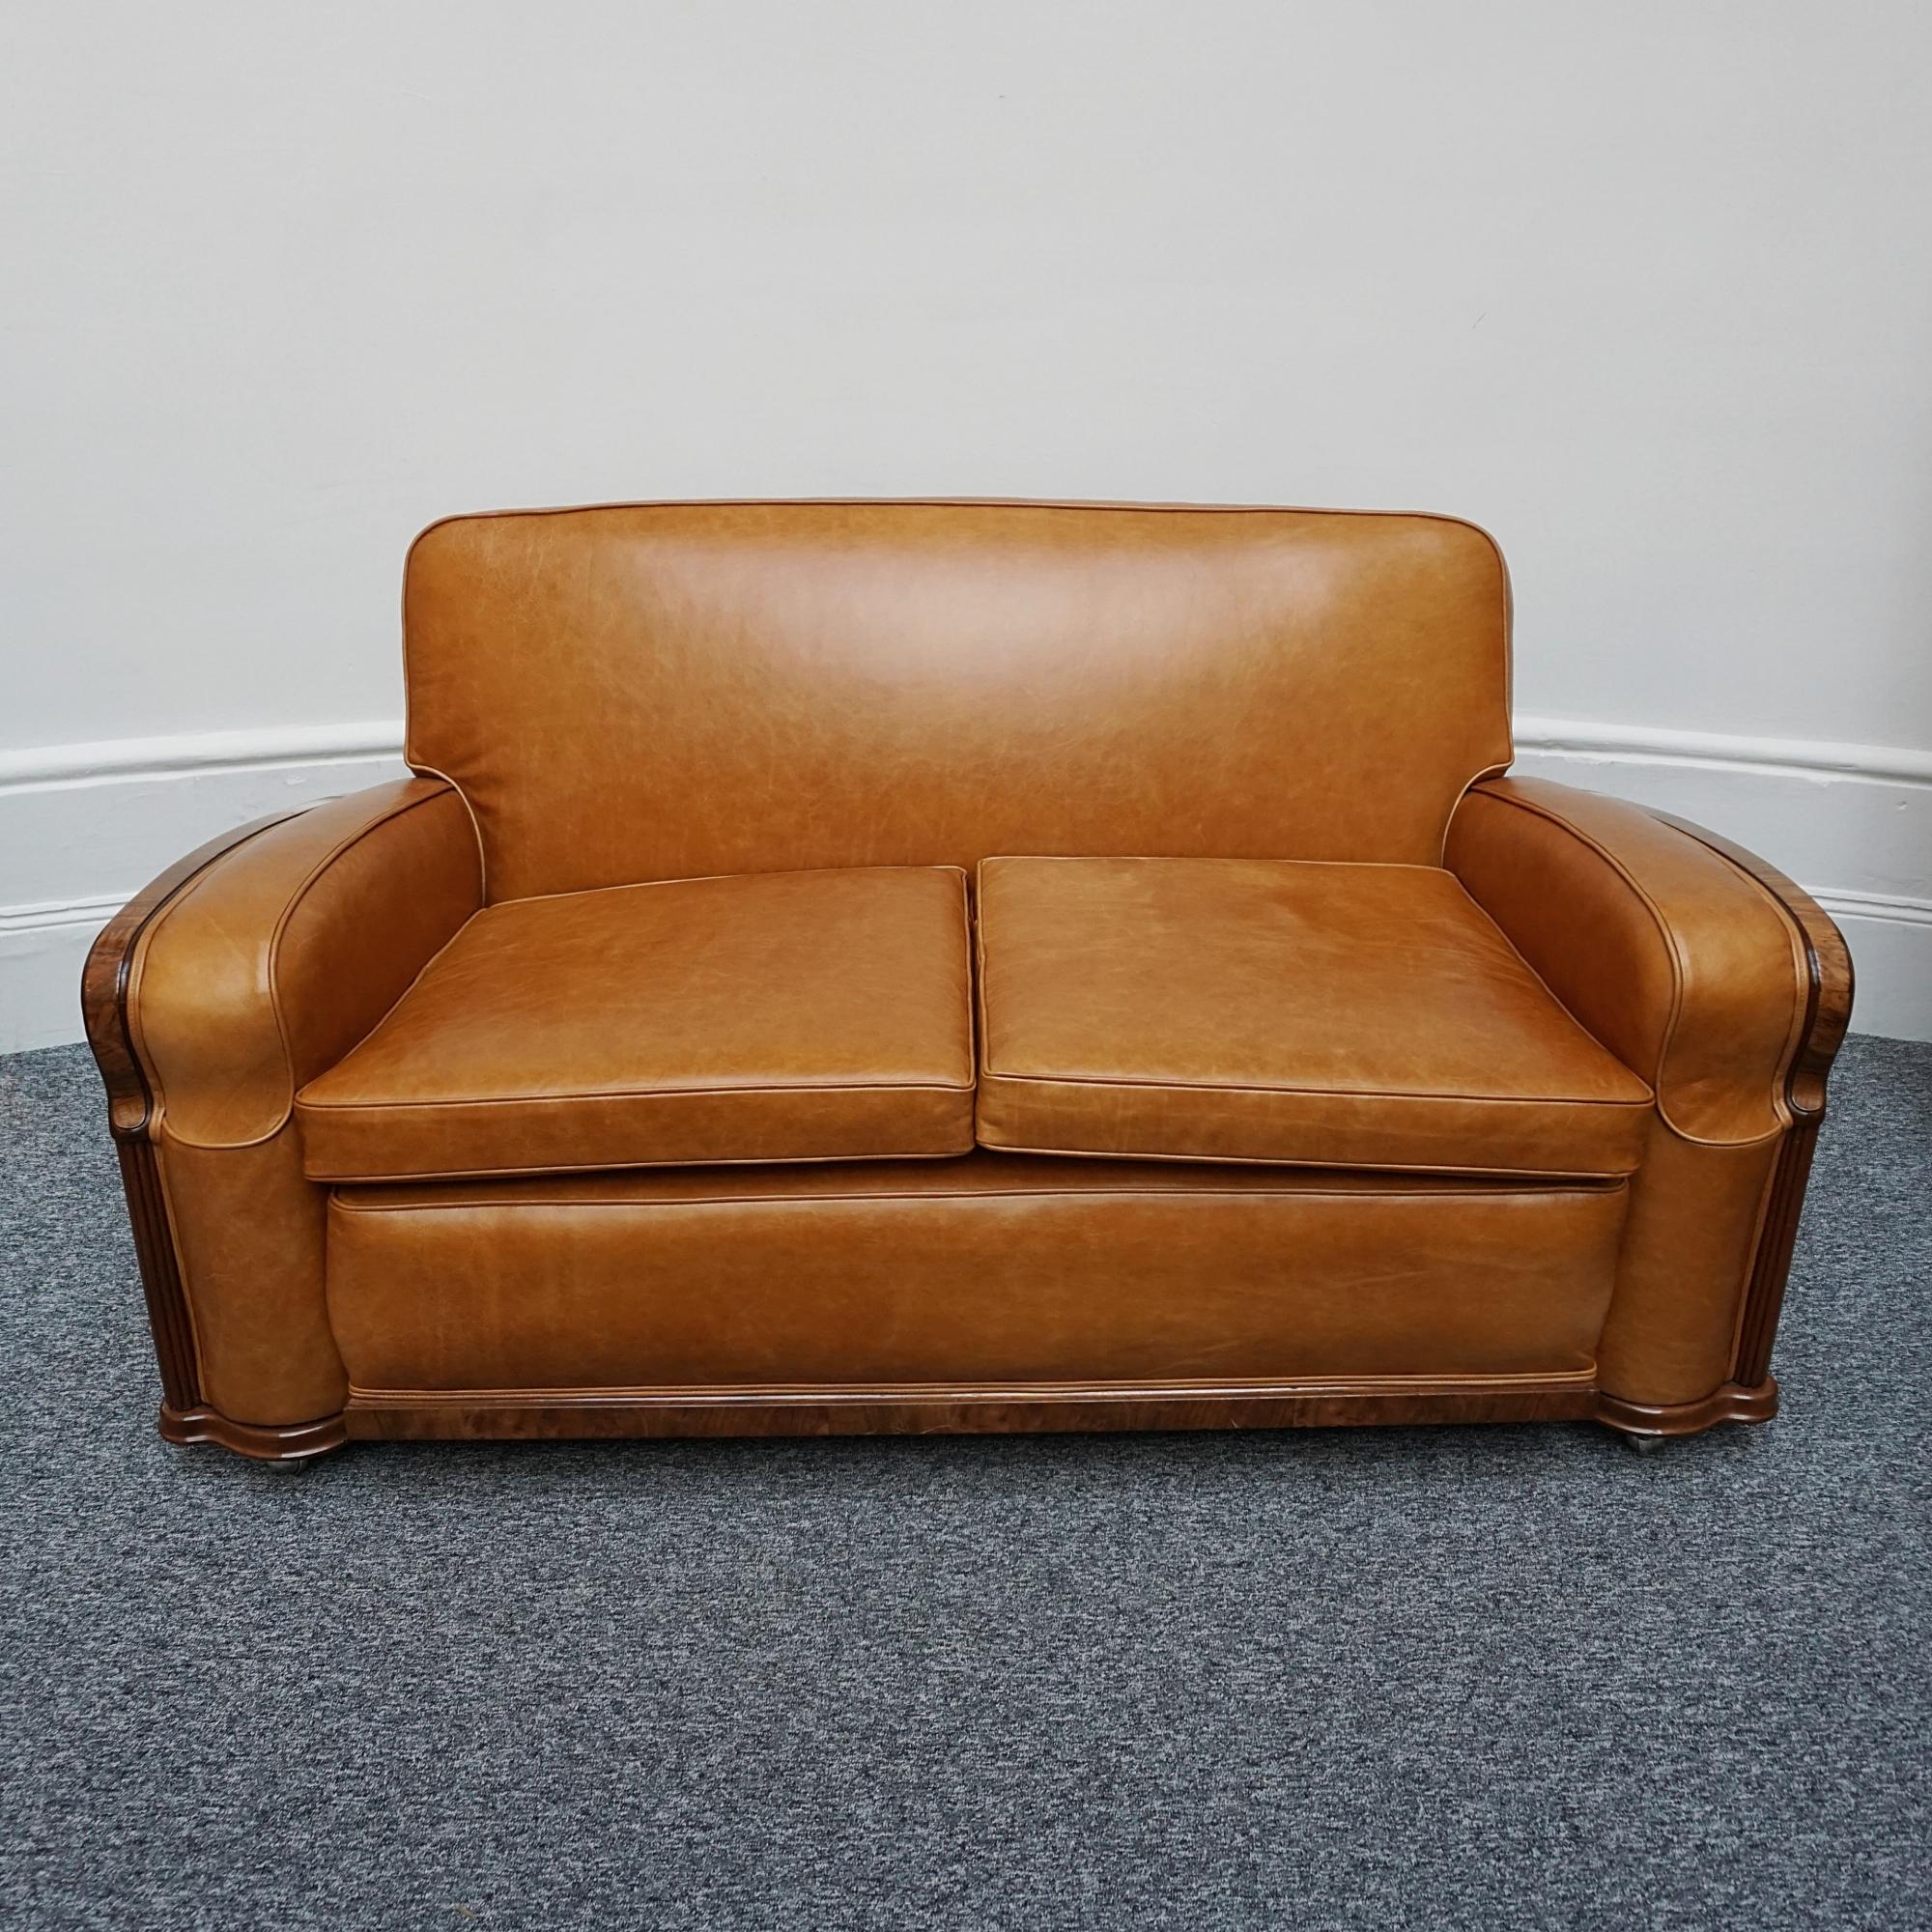 An Art Deco Club Sofa. Burr and figured walnut veneered throughout with burr walnut banded arms and scrolled detail. Re-upholstered in brown leather. 

Dimensions: H 79cm W 168cm D 71cm Seat H 49cm W 123cm D 61cm

